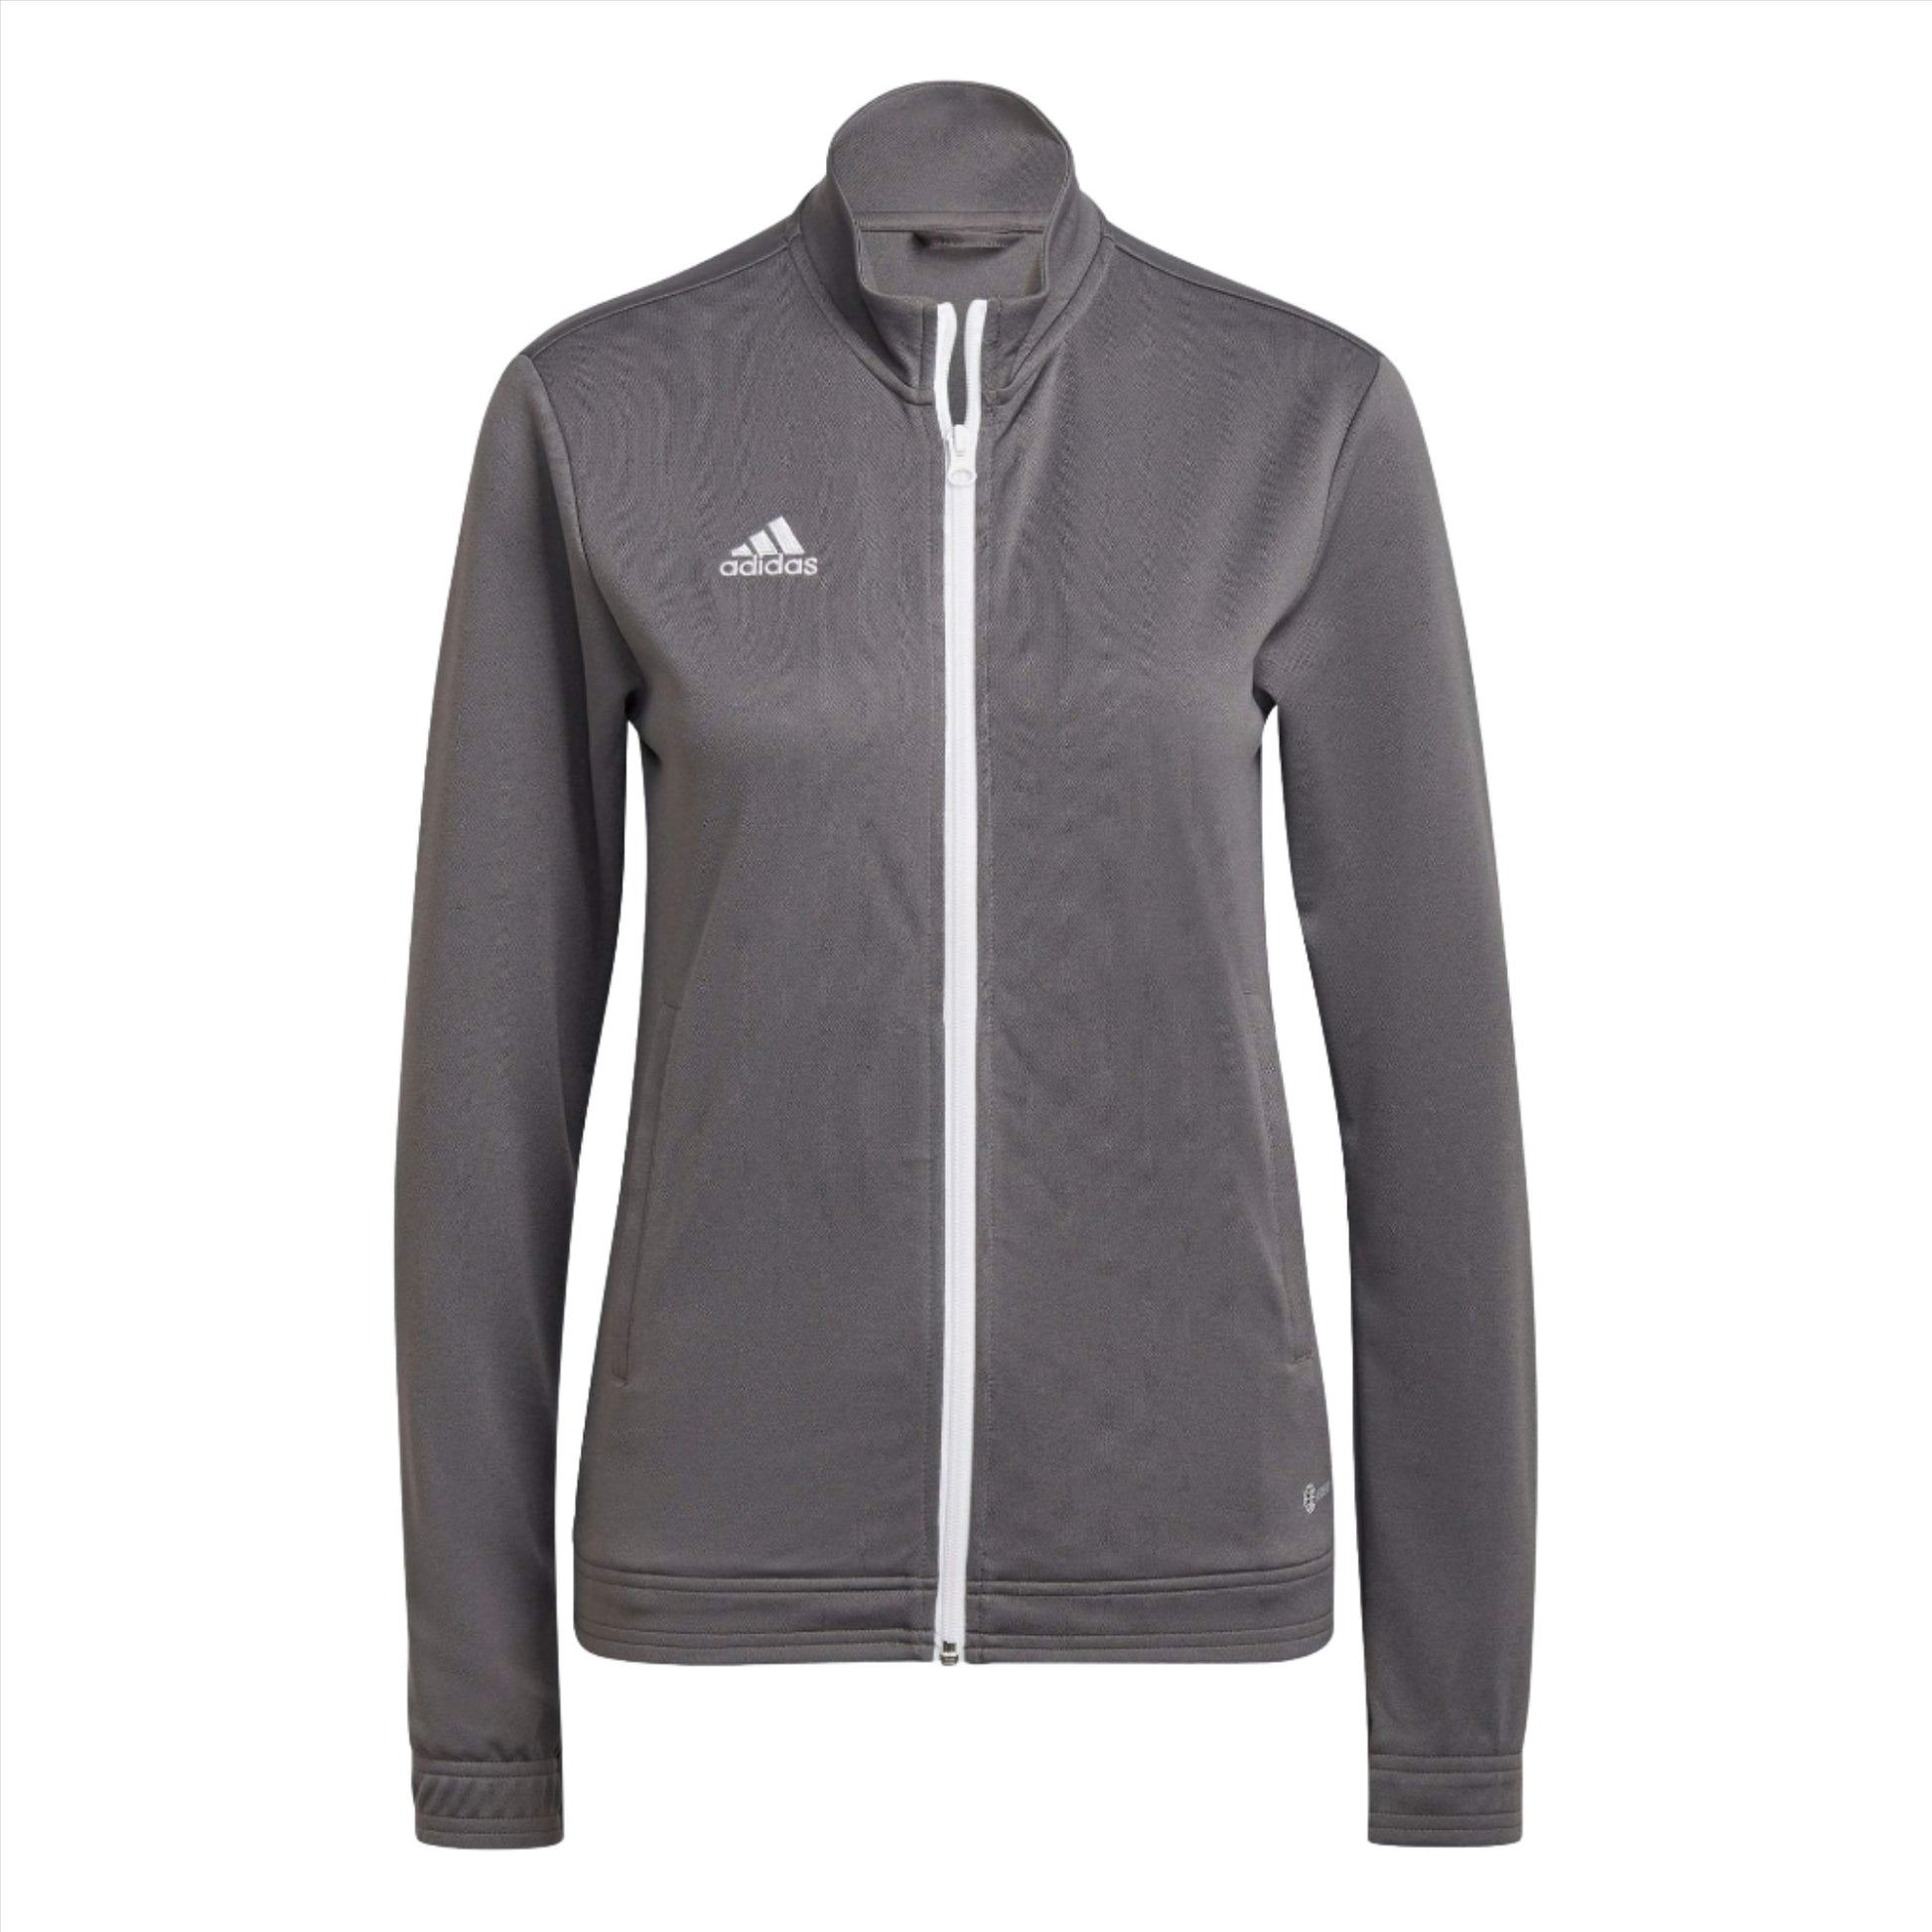 Entrada 22 Track Jacket Ladies by Adidas - The Luxury Promotional Gifts Company Limited